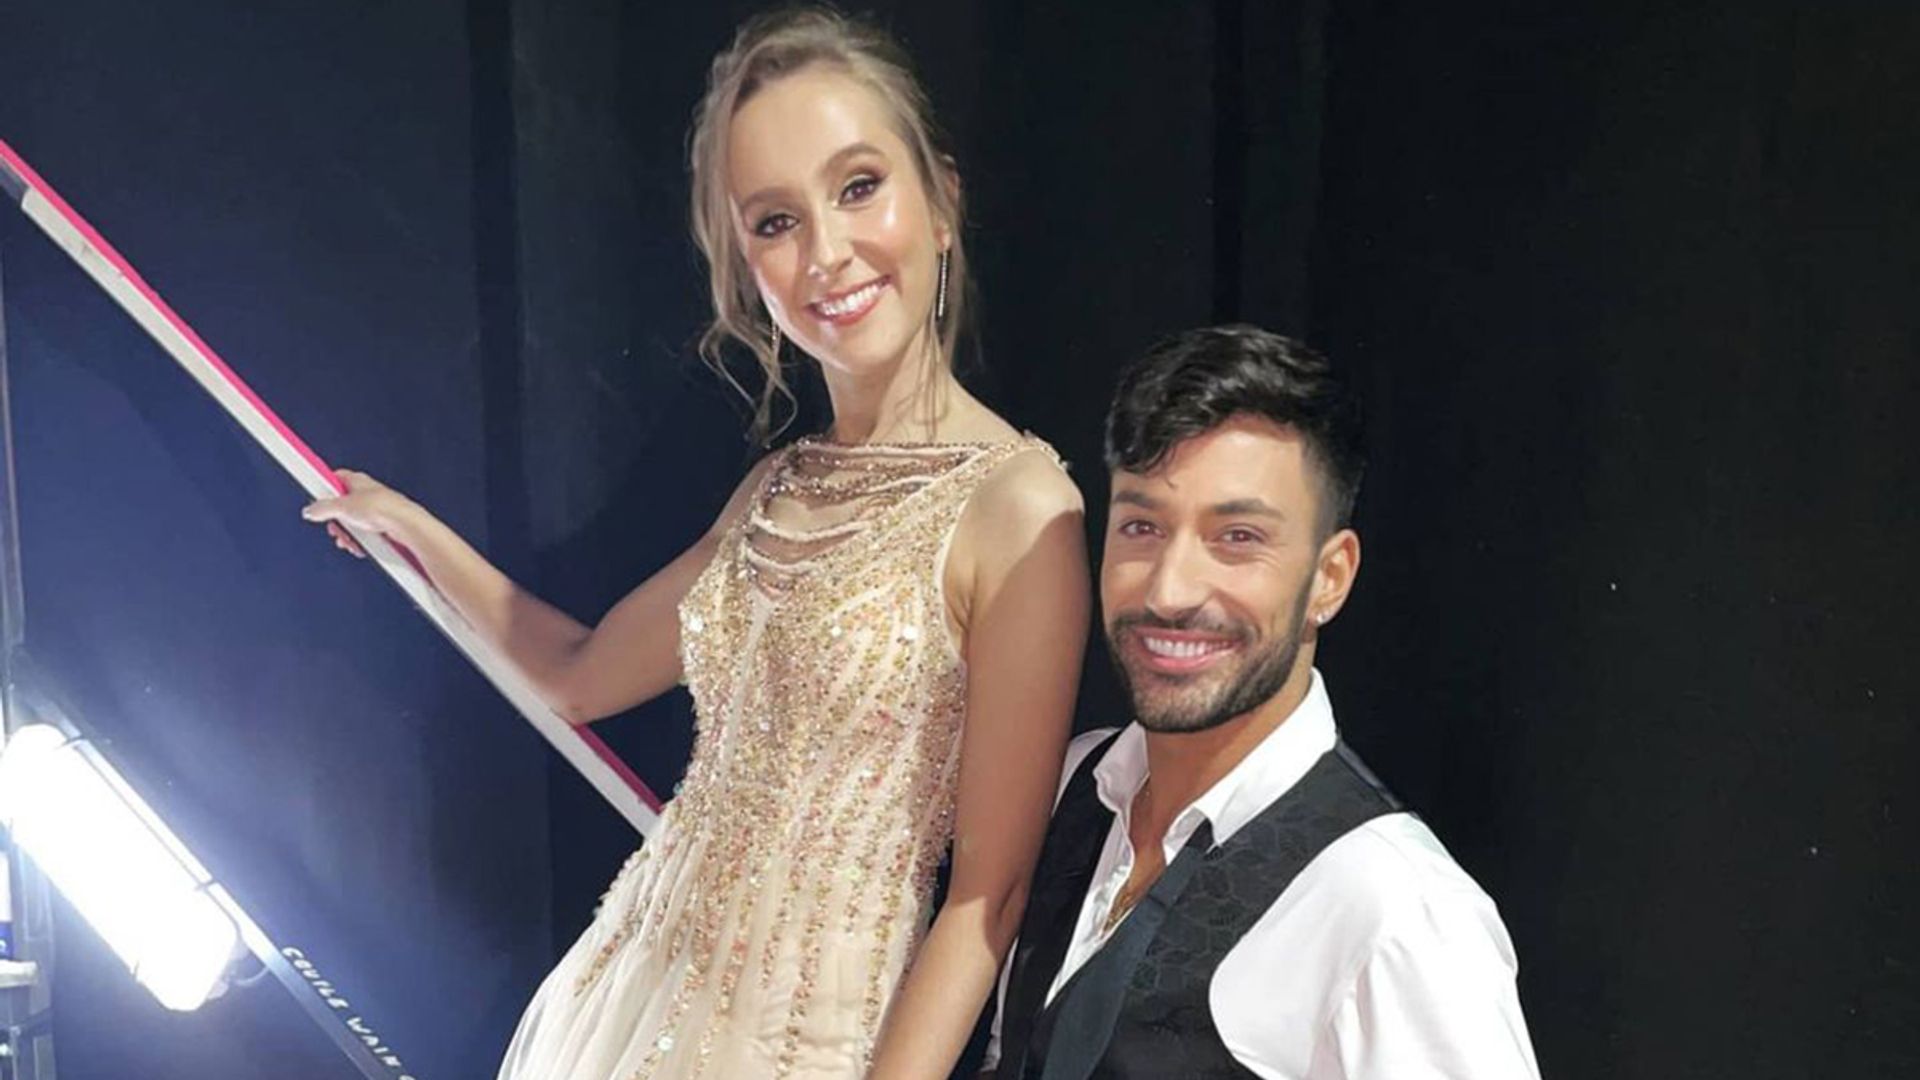 Giovanni Pernice has the sweetest reaction to Rose Ayling-Ellis's stunning selfie